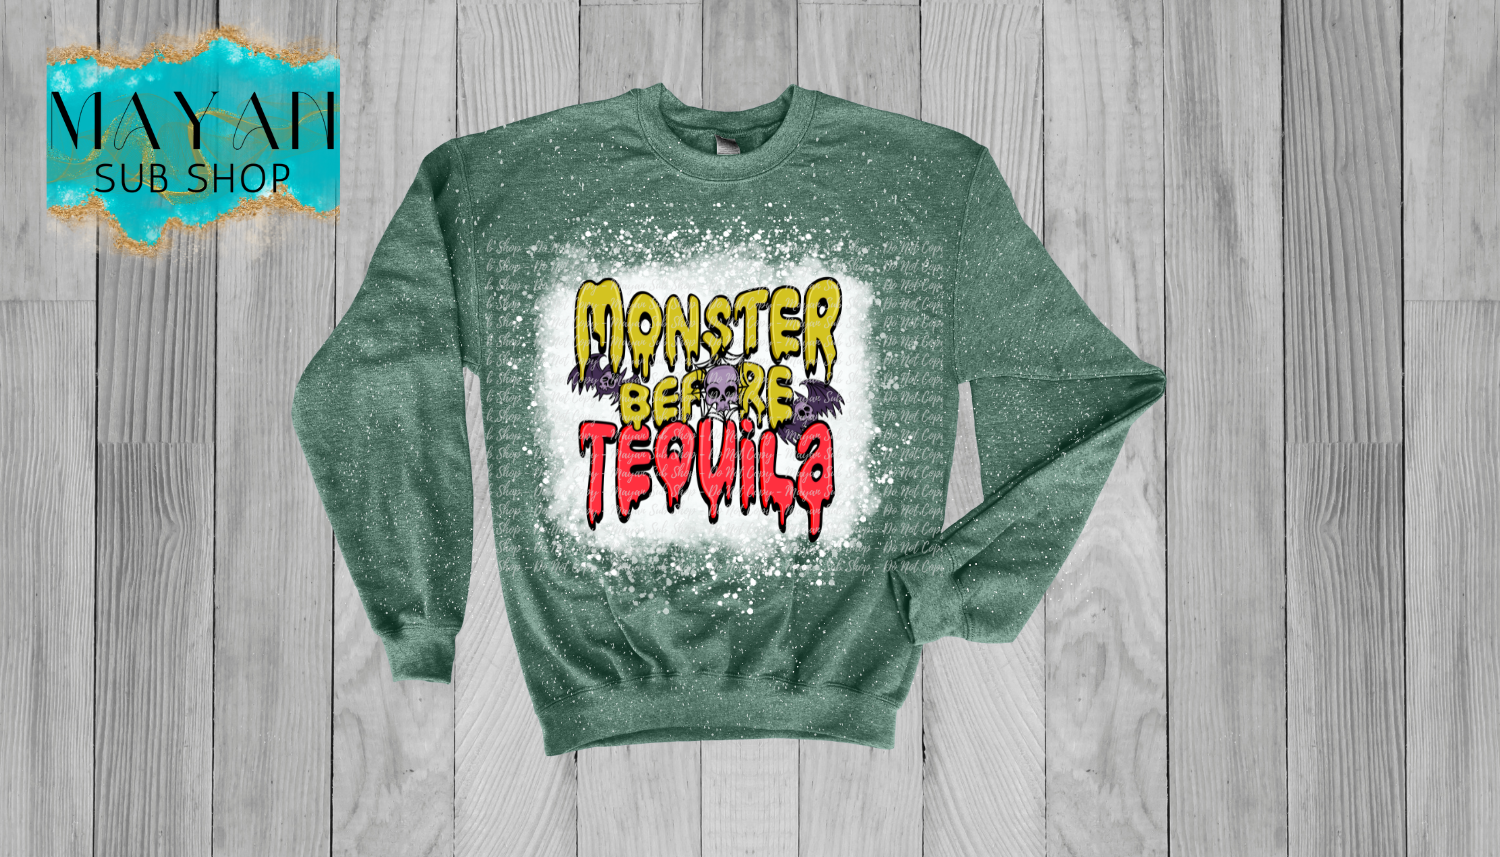 Monster Before Tequila Bleached Sweatshirt - Mayan Sub Shop